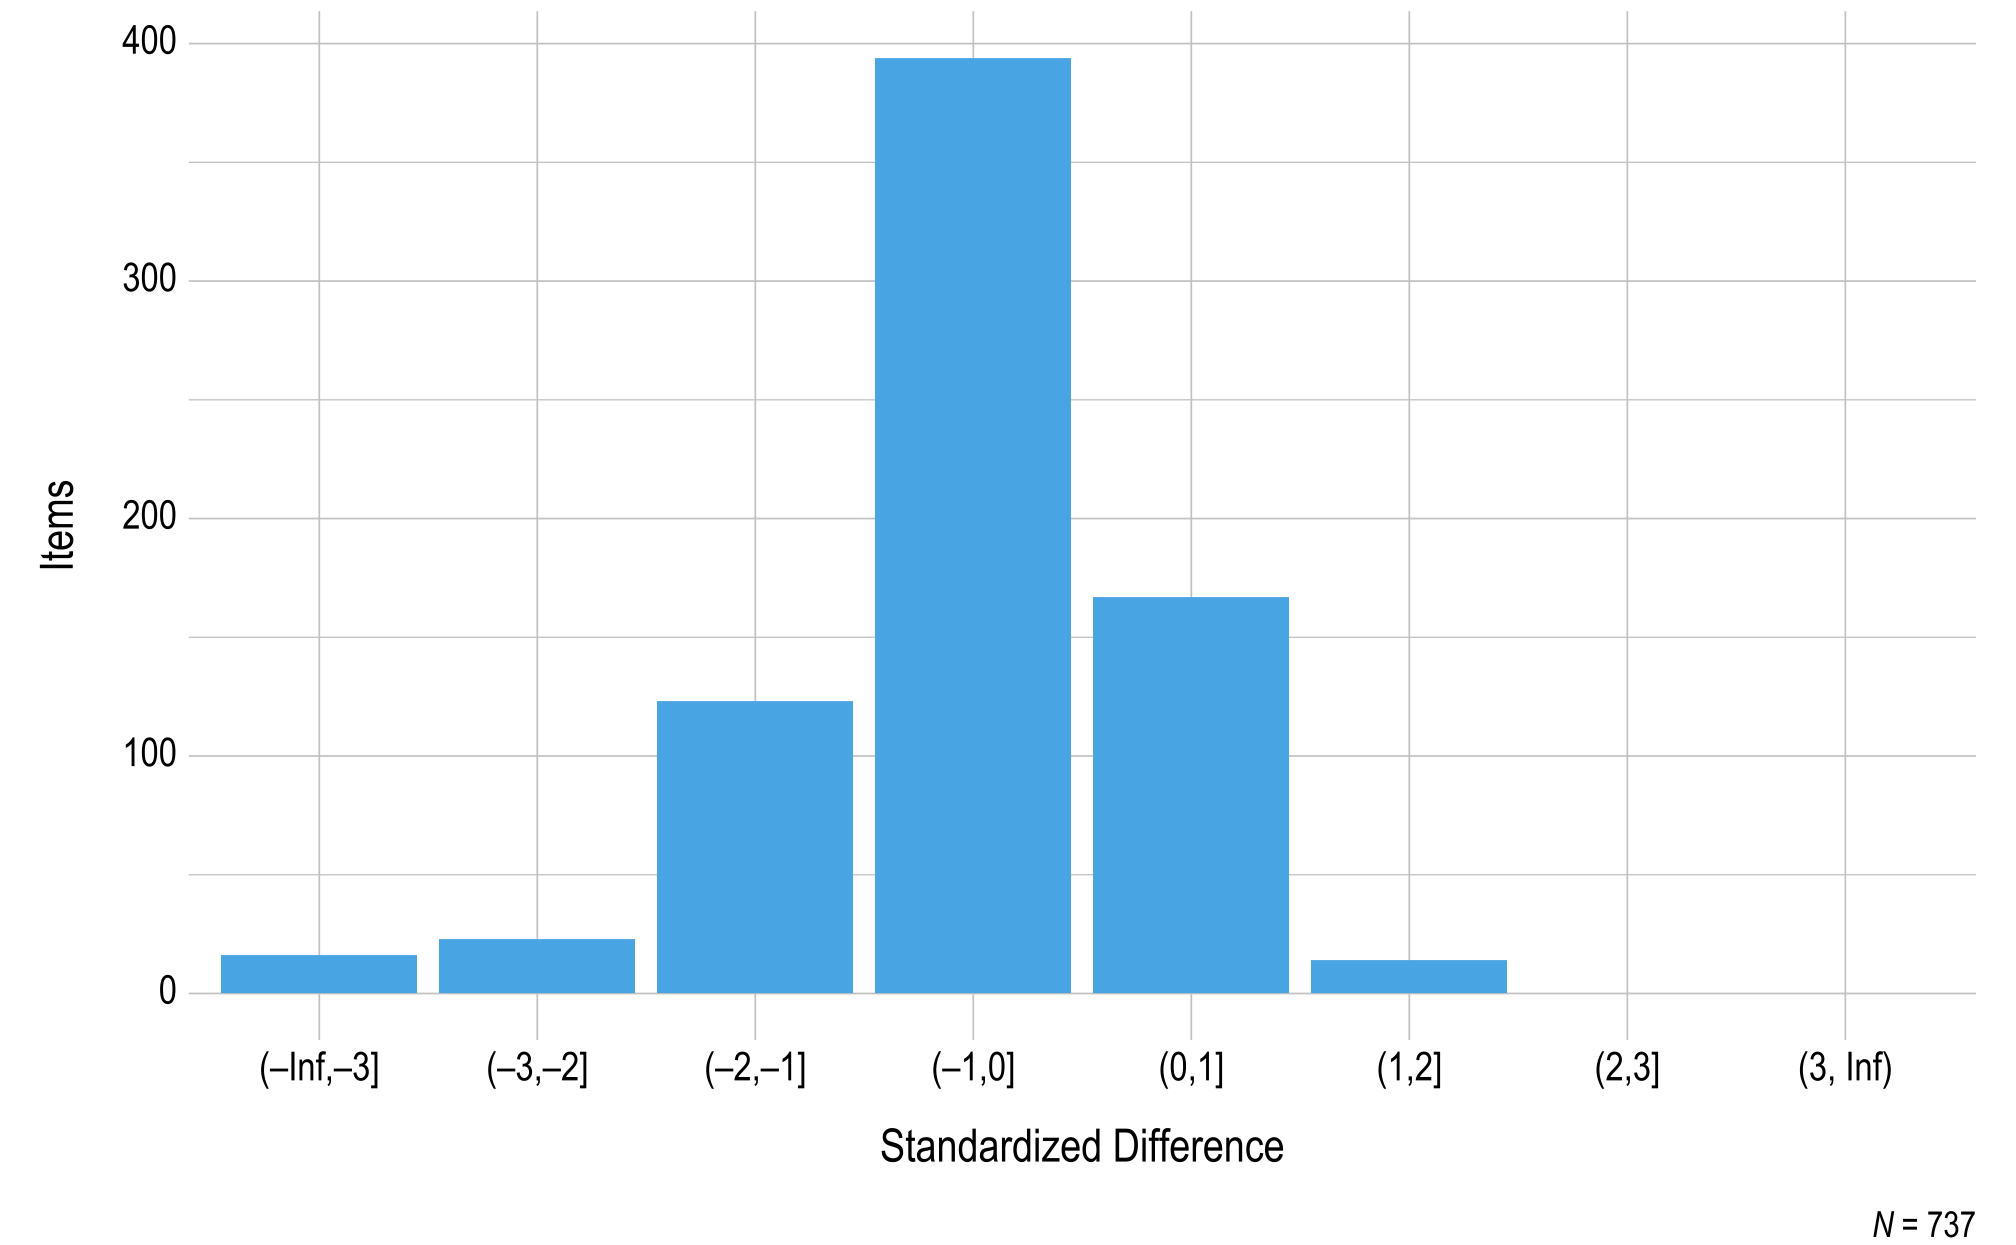 This figure contains a histogram displaying standardized difference on the x-axis and the number of mathematics field test items on the y-axis.